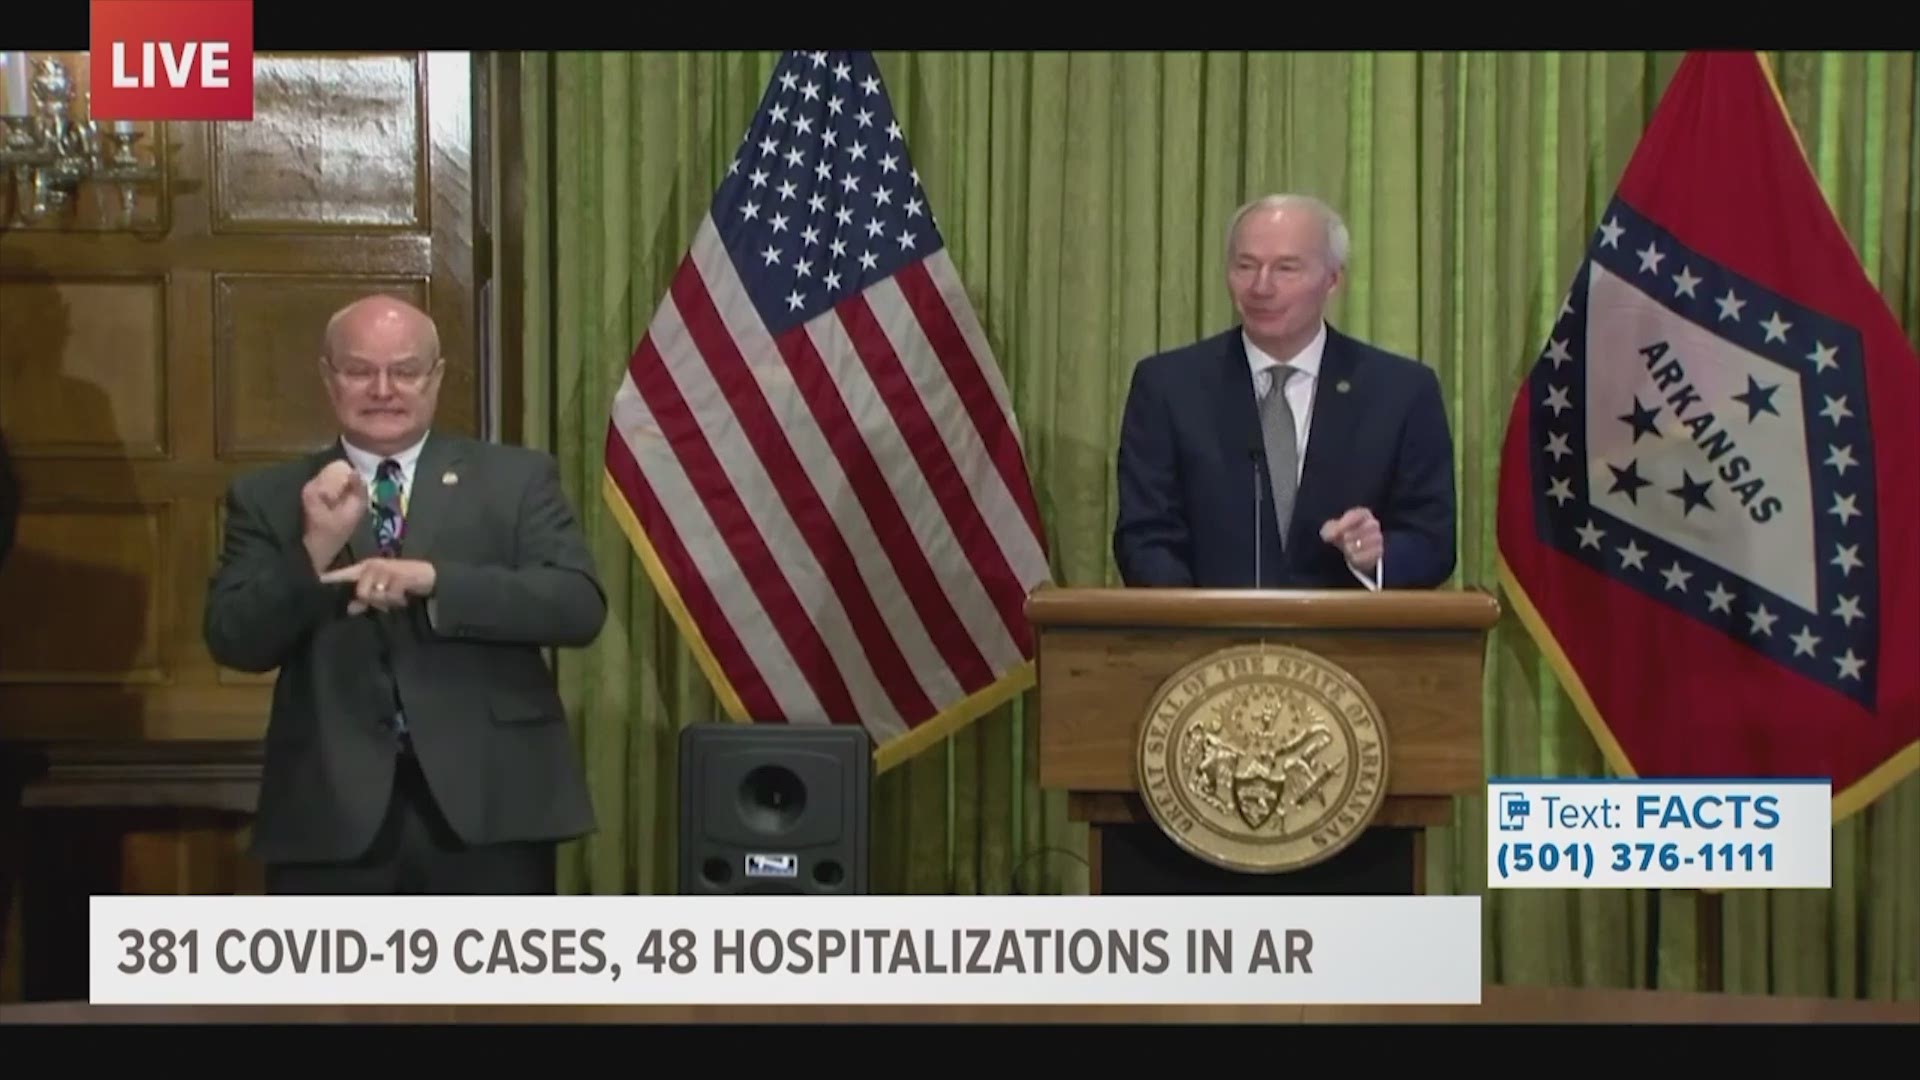 Gov. Asa Hutchinson said current modeling shows Arkansas could see 3,500 positive coronavirus cases in April.